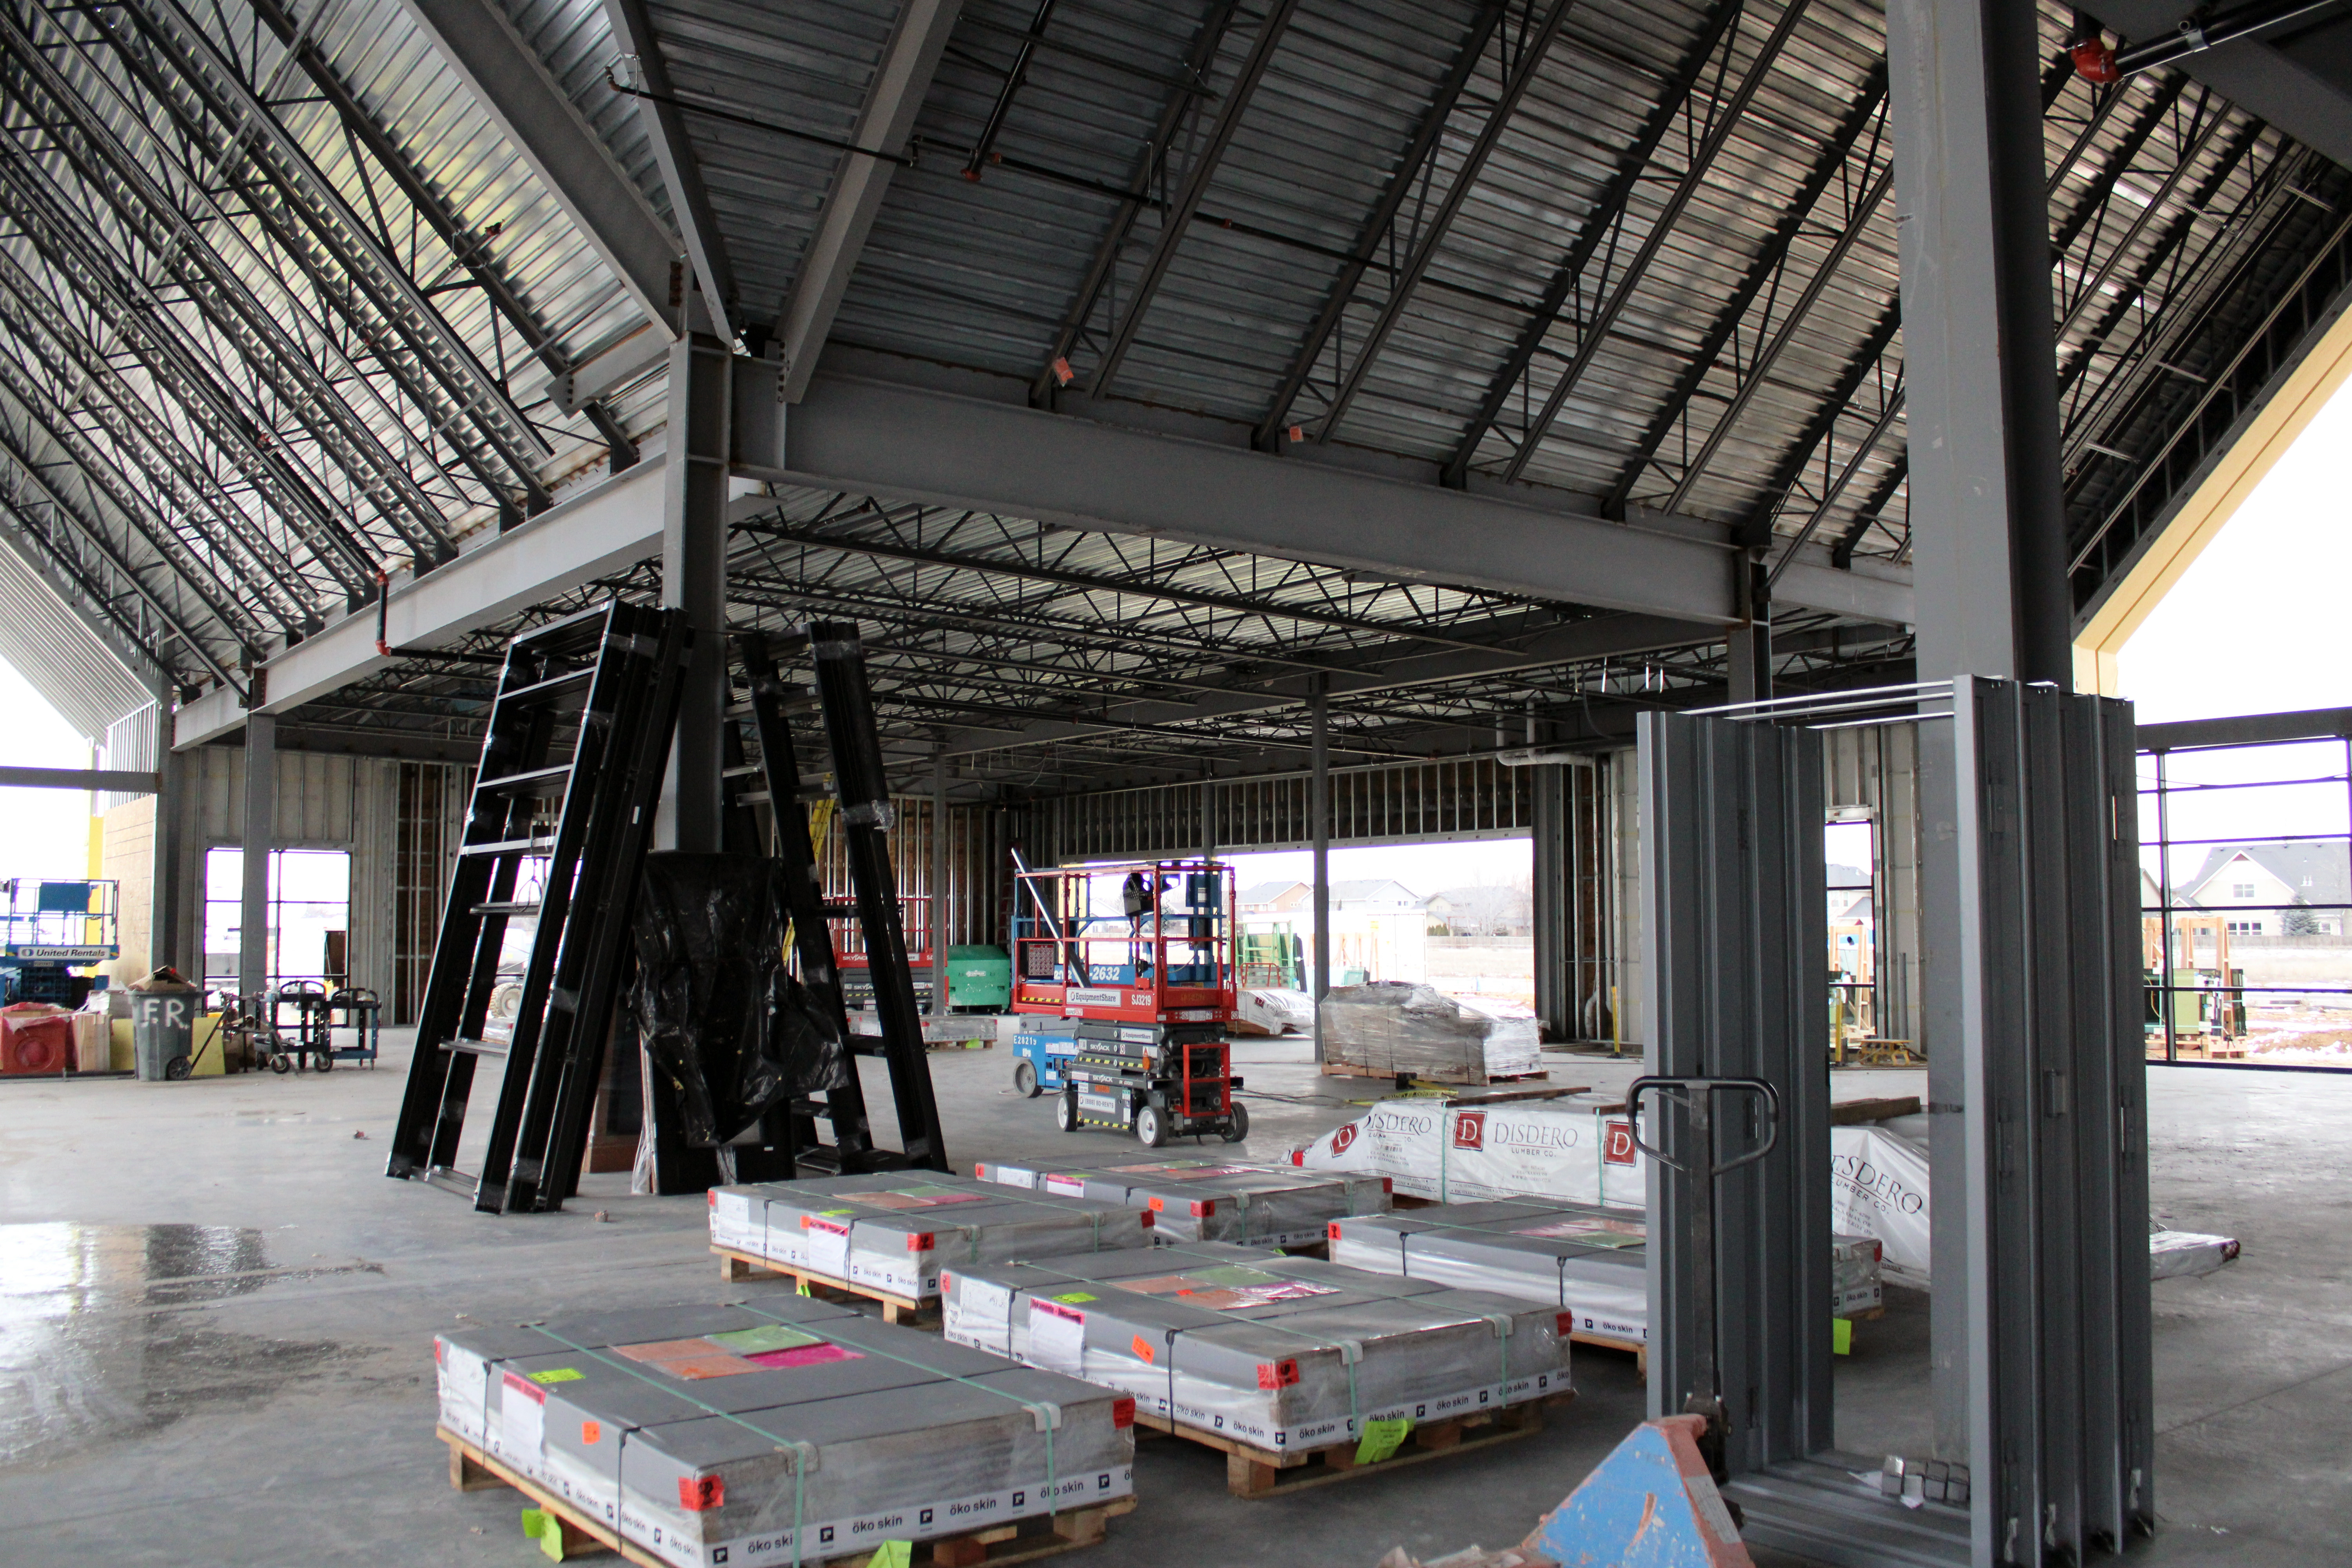 Orchard Park Construction image showing the inside of the building in progress with palettes and ladders